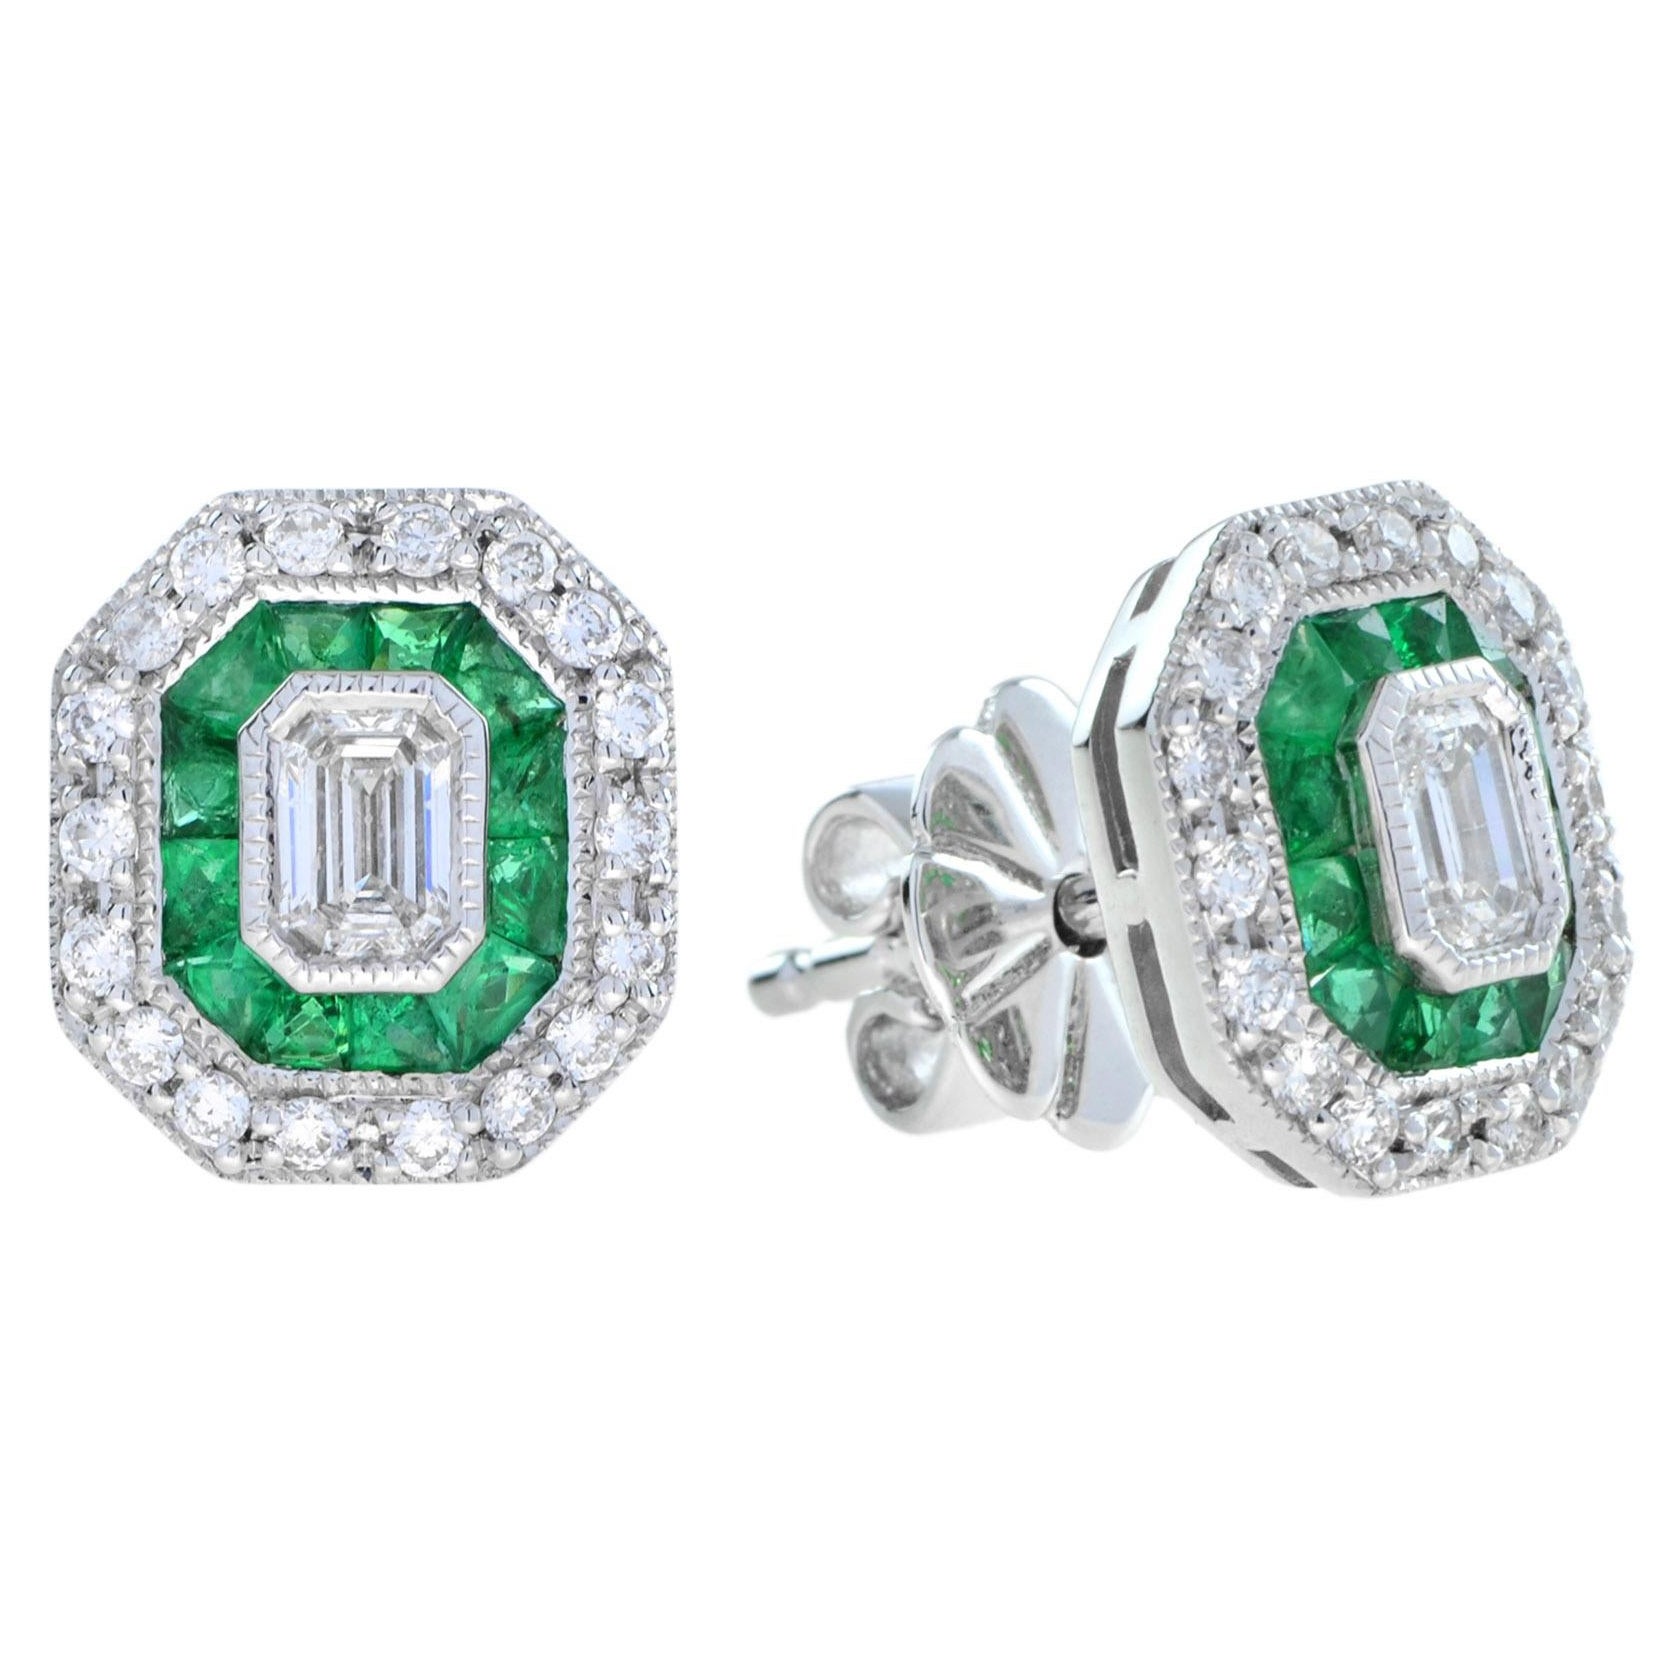 Art Deco Style Emerald Cut Diamond with Emerald Stud Earrings in 18K White Gold For Sale